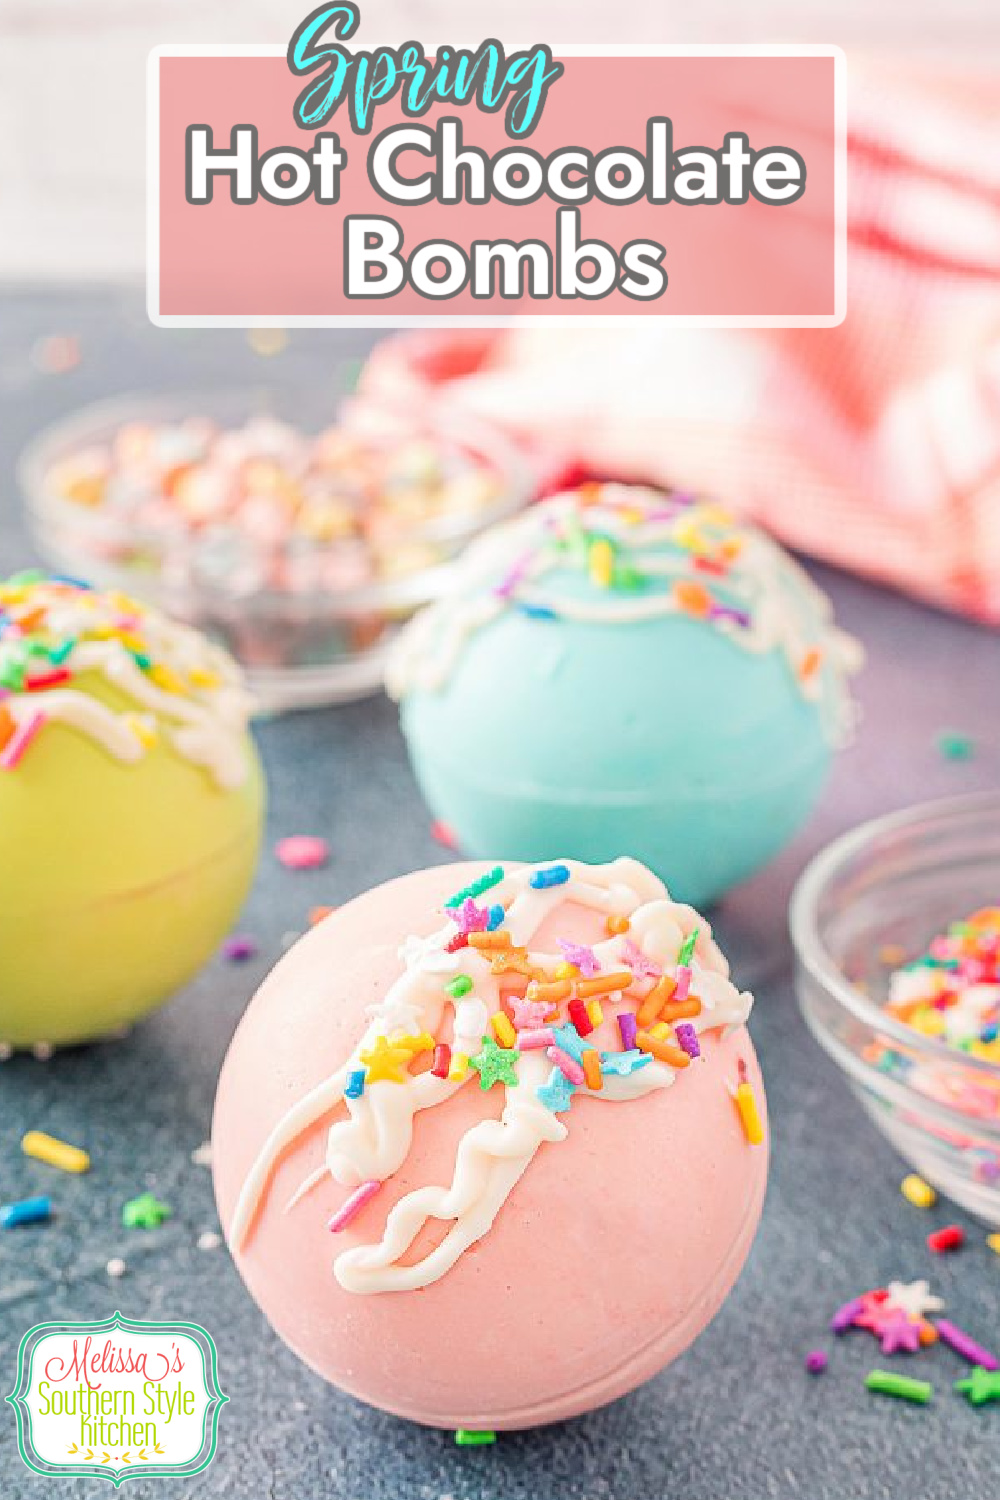 Add these bright and colorful Spring Hot Chocolate bombs to your Easter goodies this year #hotchocolatebombs #easterdesserts #easterbaskets #springdesserts #hotcocoabombs #easyrecipes #whitechocolate #southernrecipes via @melissasssk